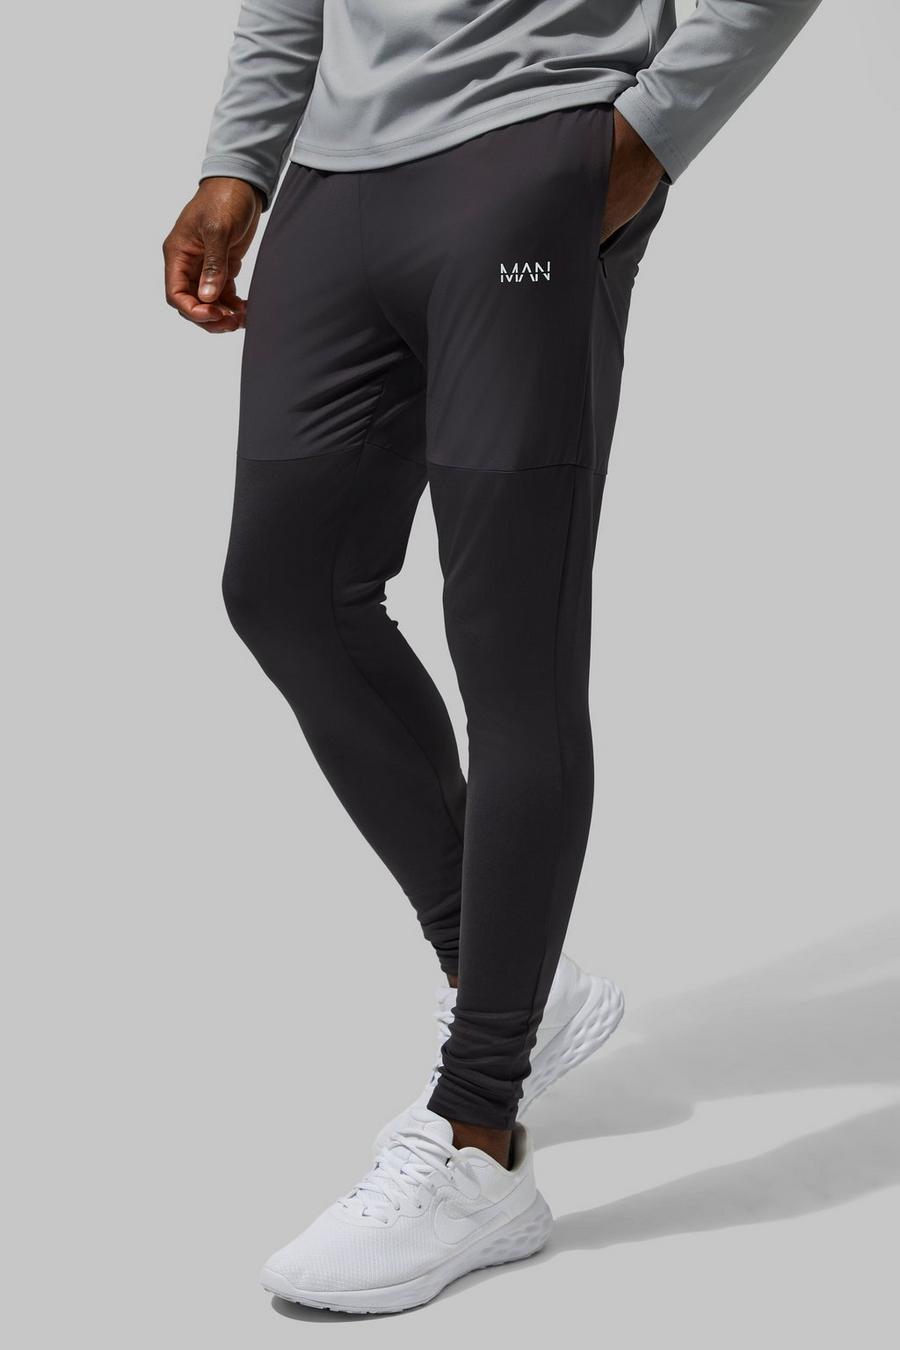 Man Active Performance Leggings, Charcoal image number 1